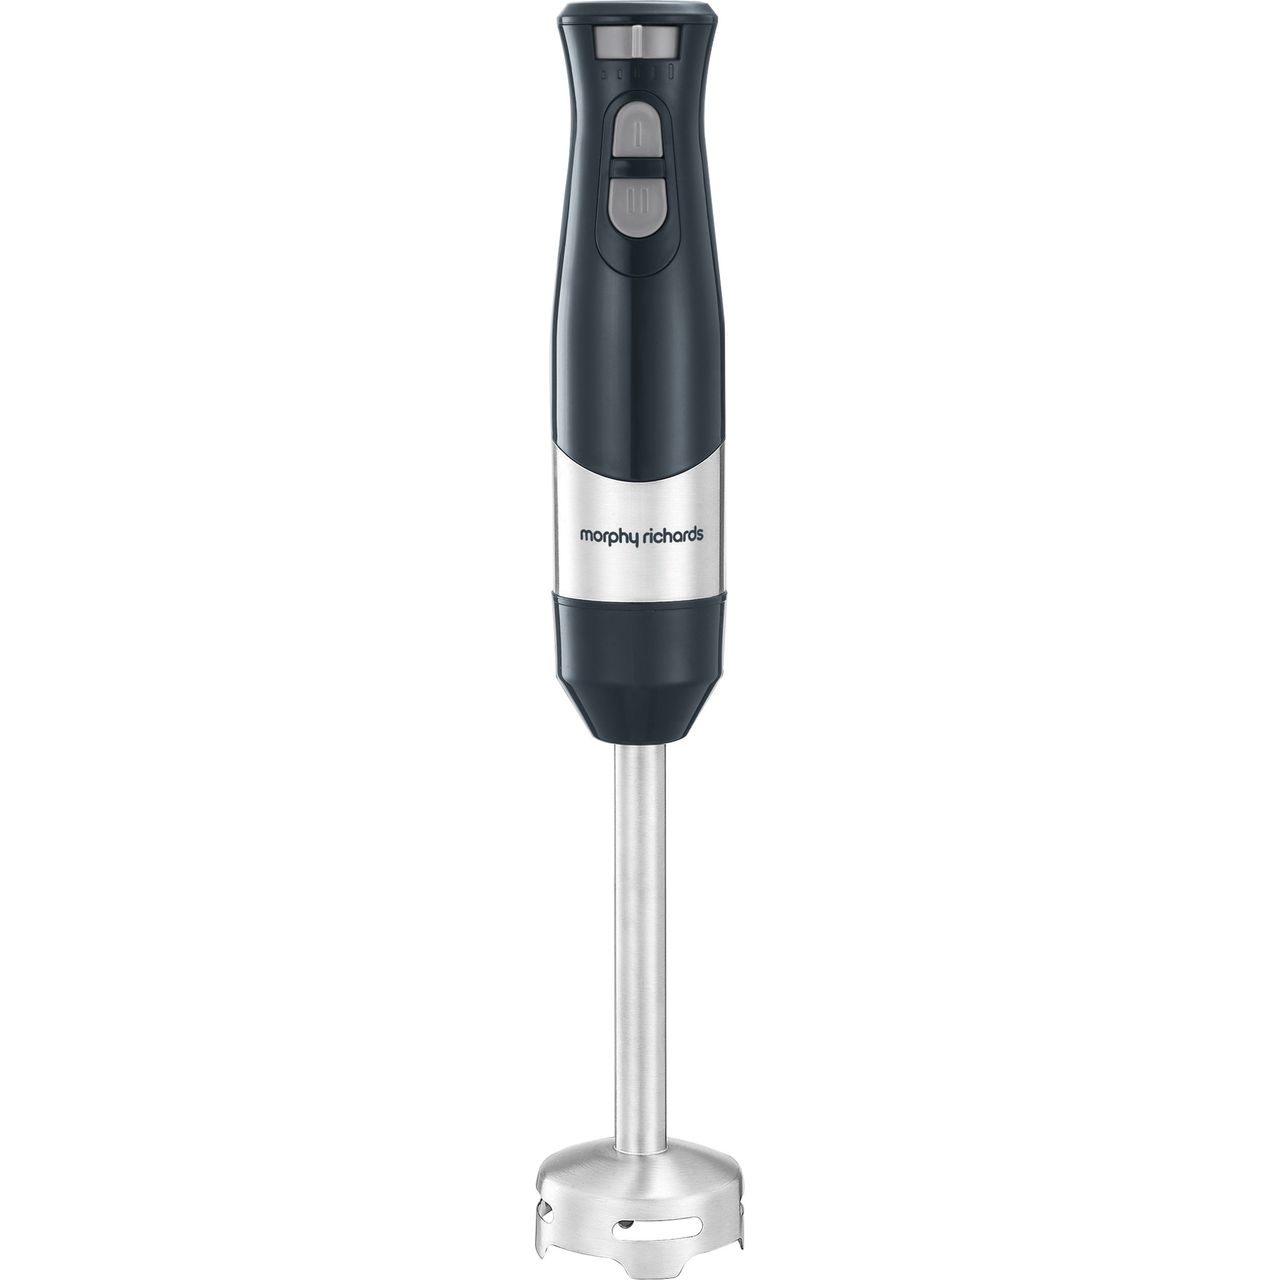 Morphy Richards Total Control 402060 Hand Blender Review